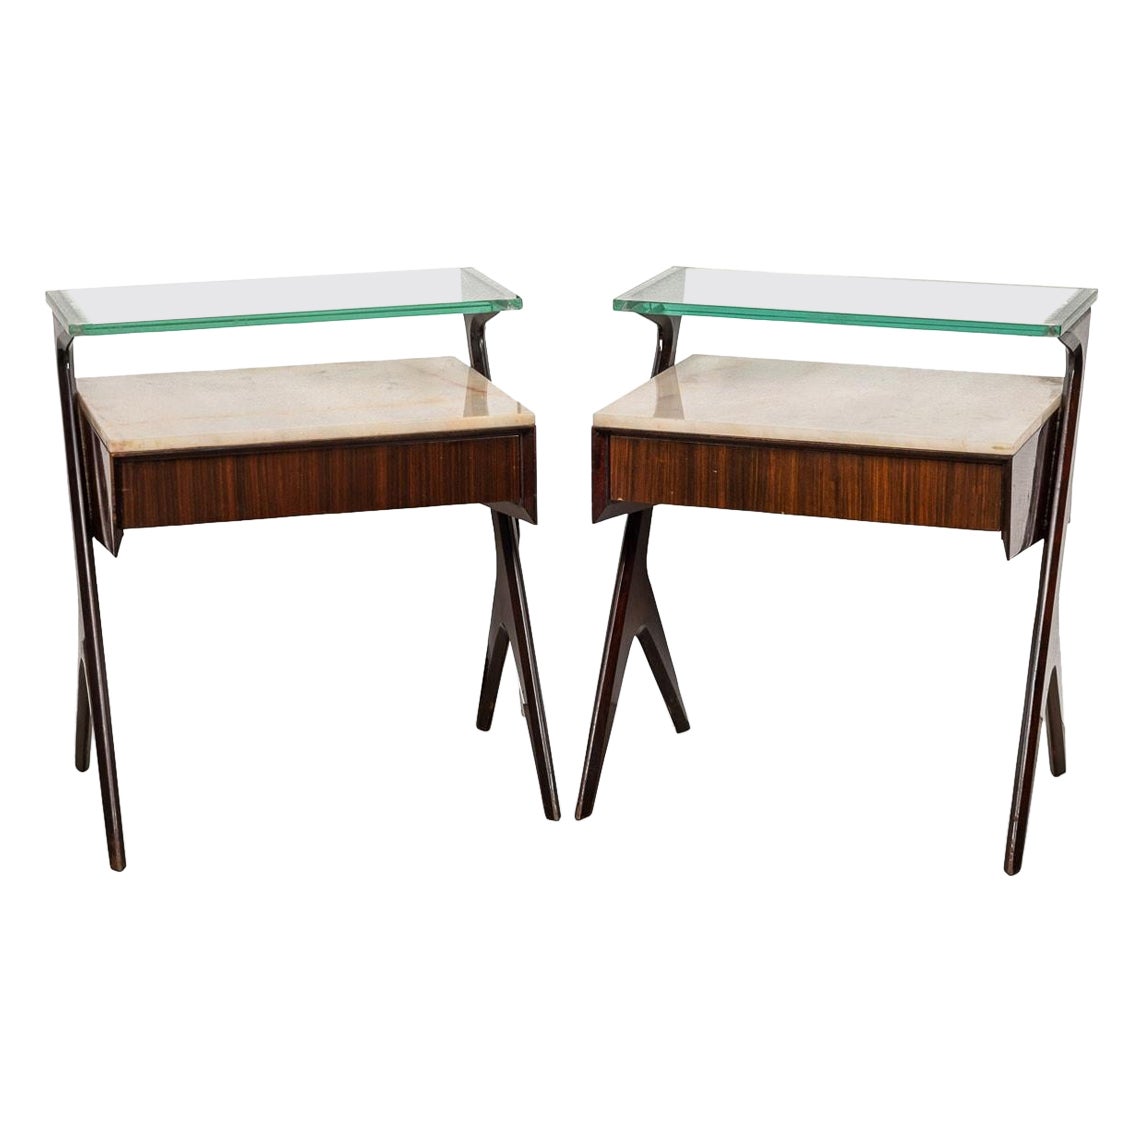 A Pair Of Italian Rosewood Side Tables By Vittorio Dassi, c.1950 For Sale